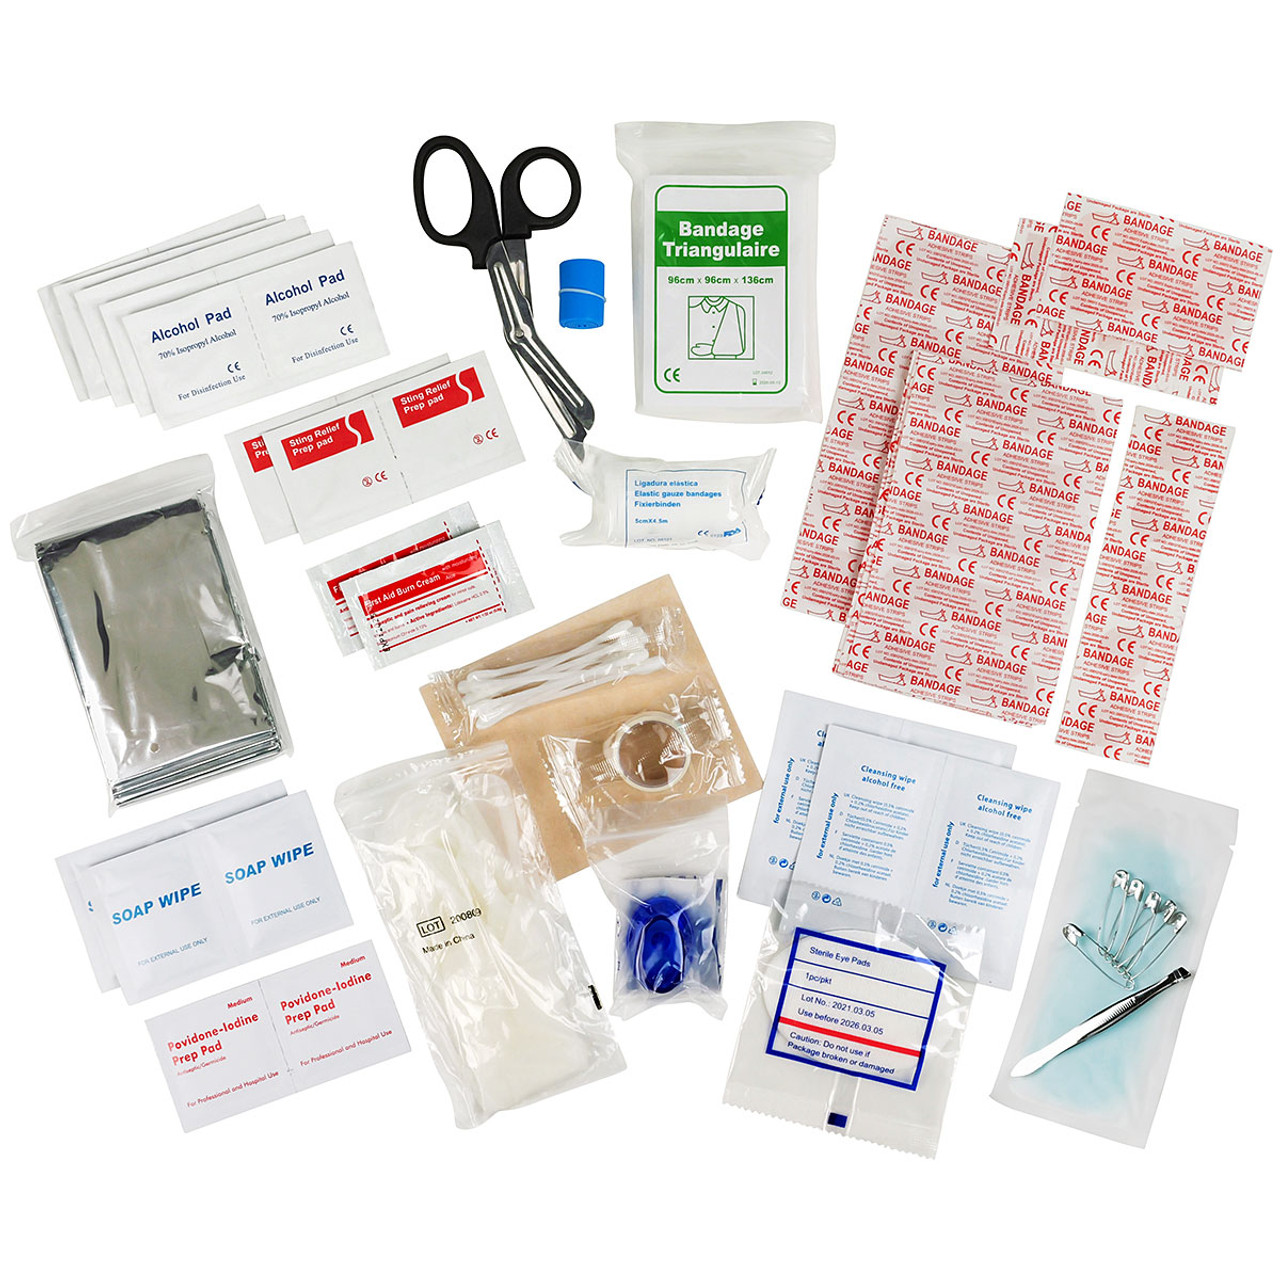 100 Piece First Aid Kit in Waterproof Red Dry Sack - First Aid Kits